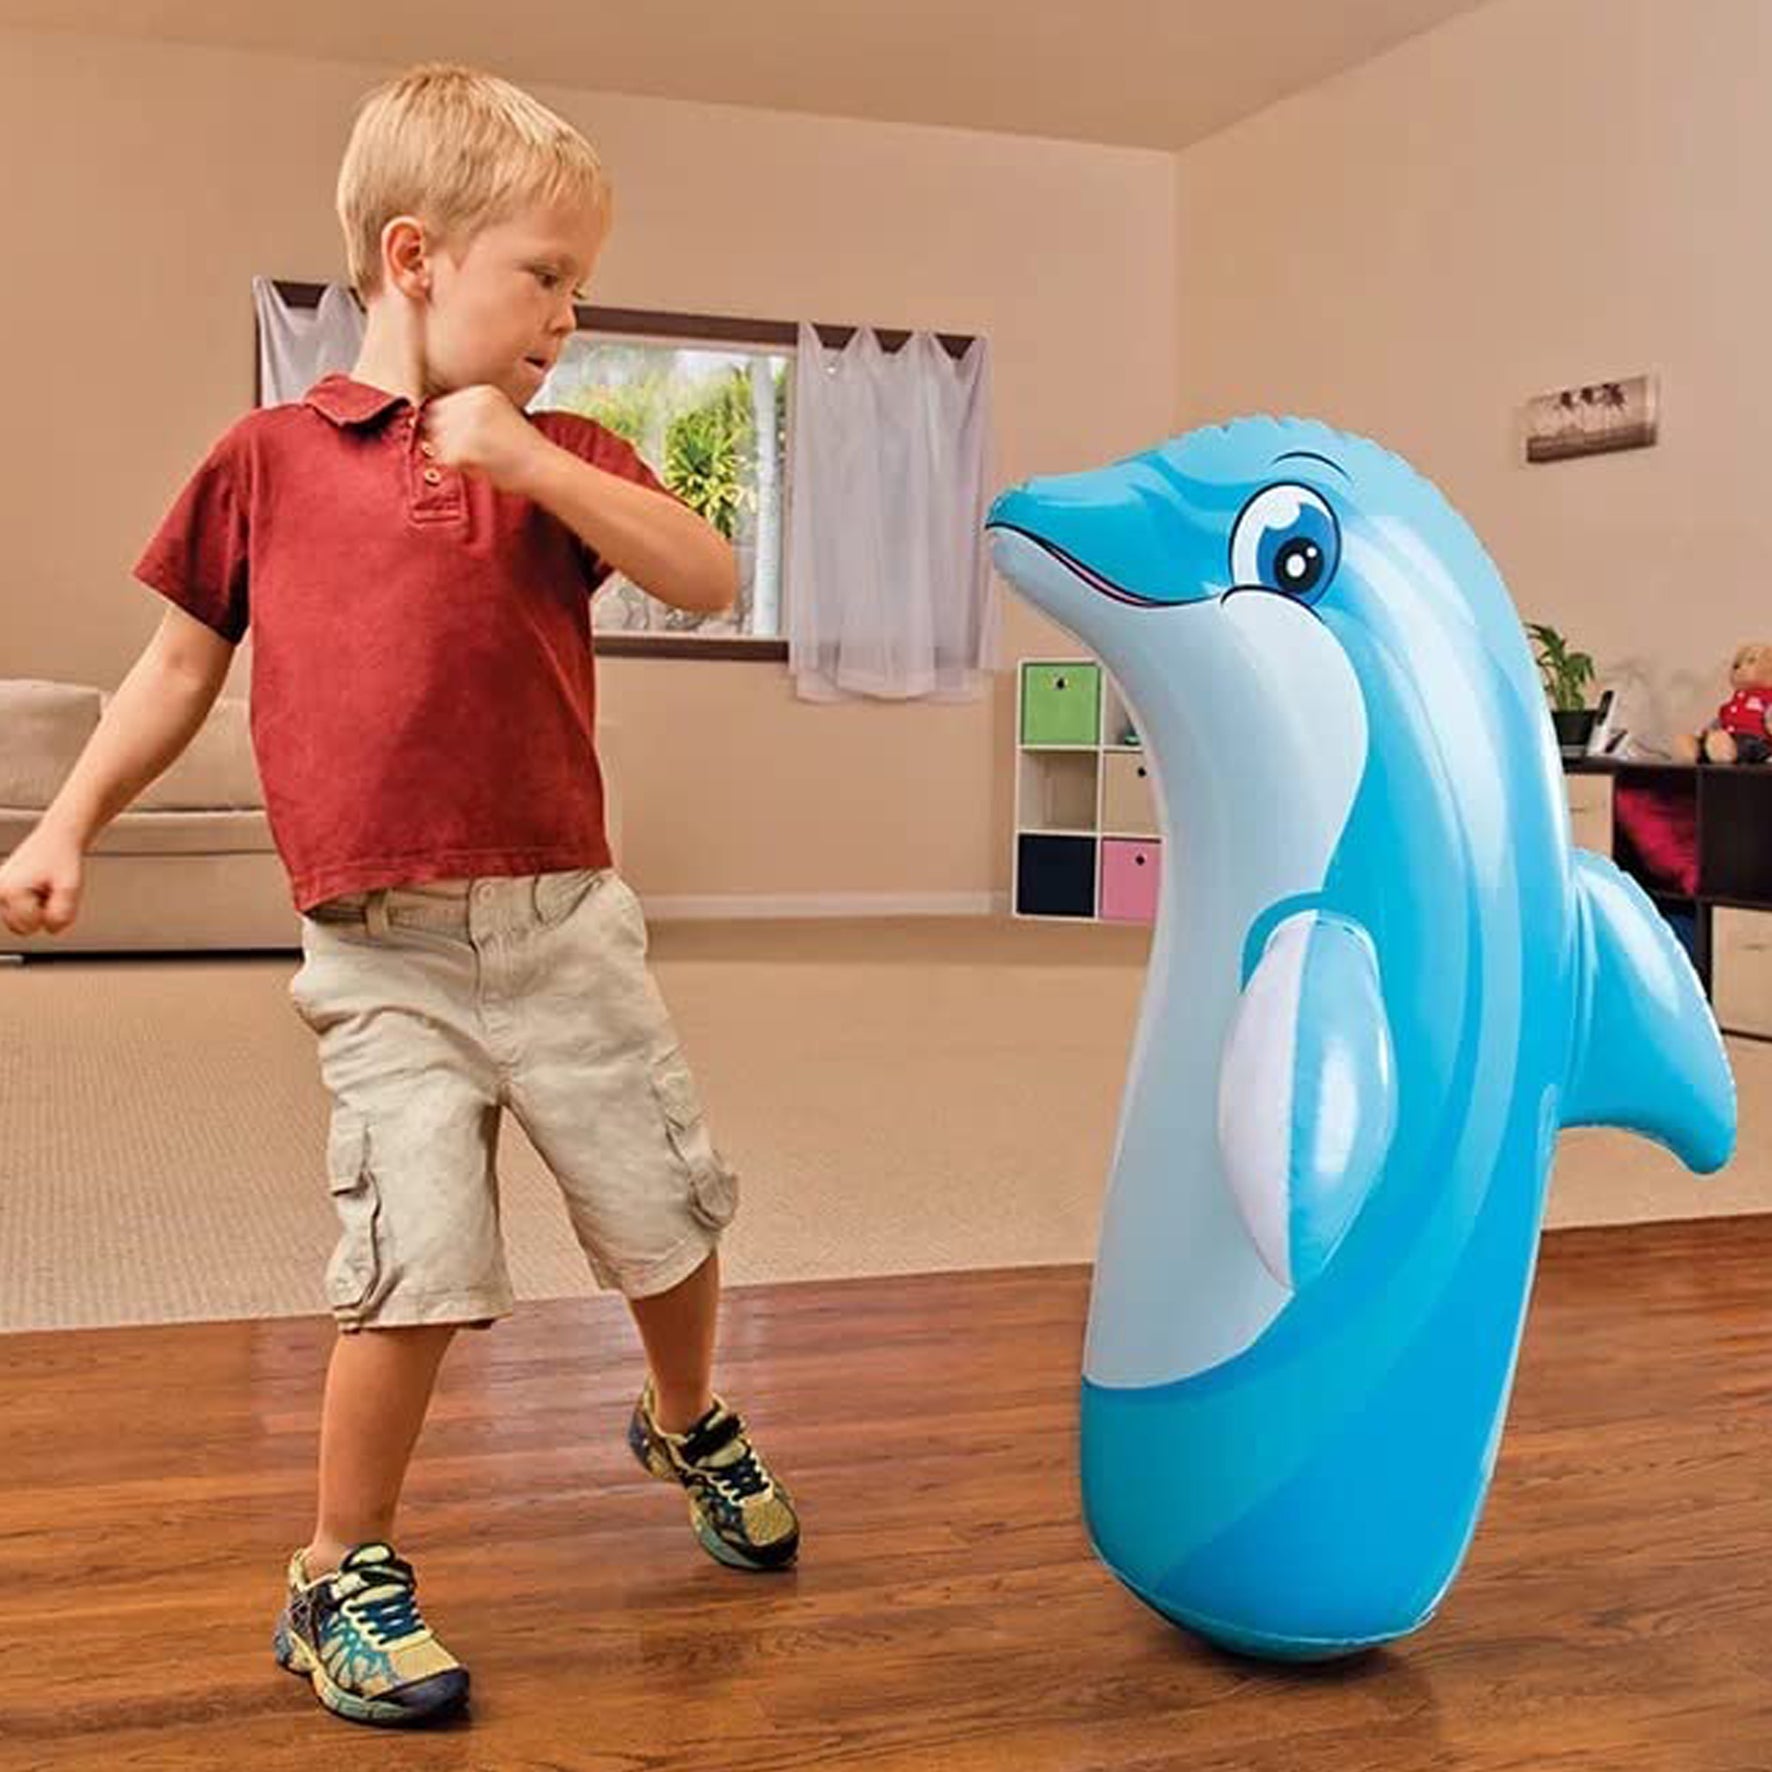 Dolphin Hit Me Toy 3-D Inflatable Animal Toy | Water Base and Air Base for Toddlers | PVC Punching Bag for Kids | Activity Toy for Kids Age 3 +.